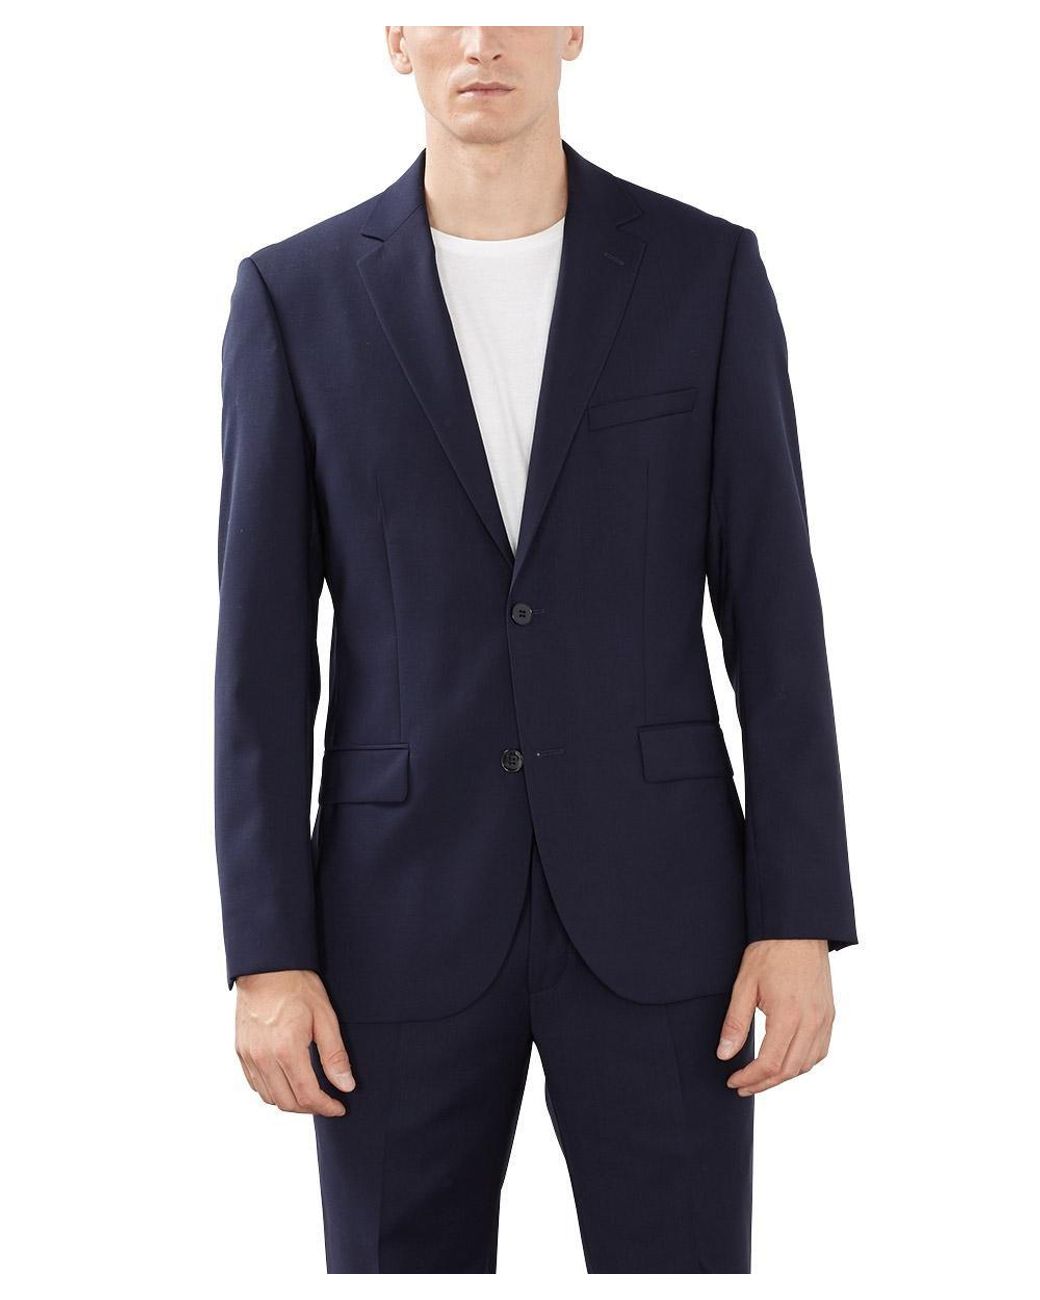 Esprit Wool Collection 993eo2g902 Long Sleeve Suit Jacket in Blue (Dark  Navy) (Blue) for Men - Lyst